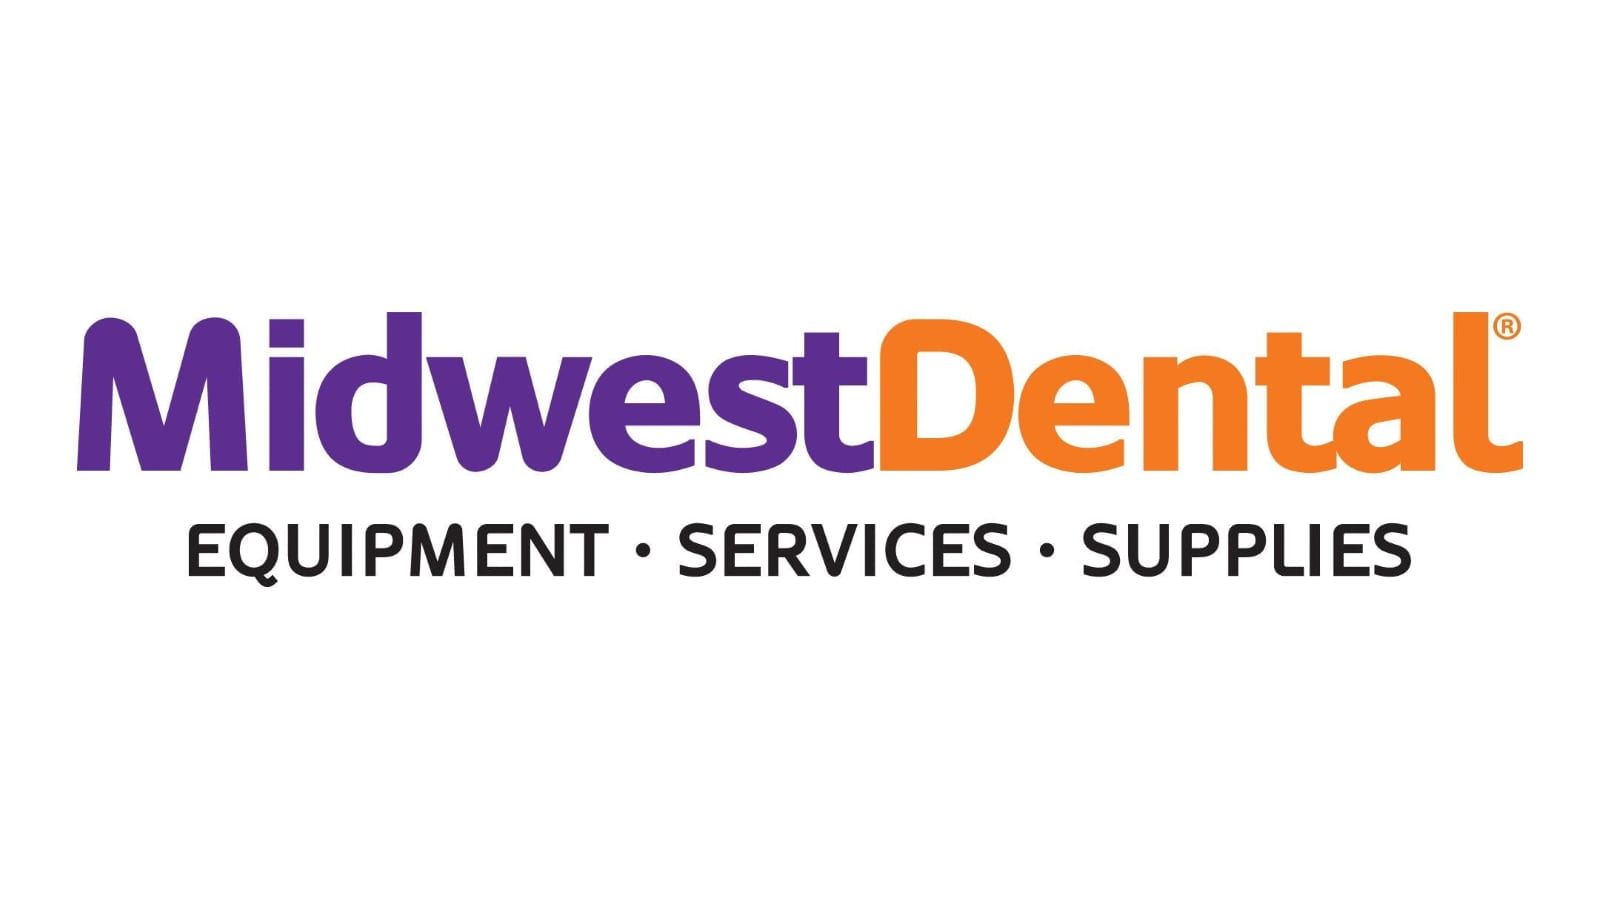 Midwest dental equipment supply